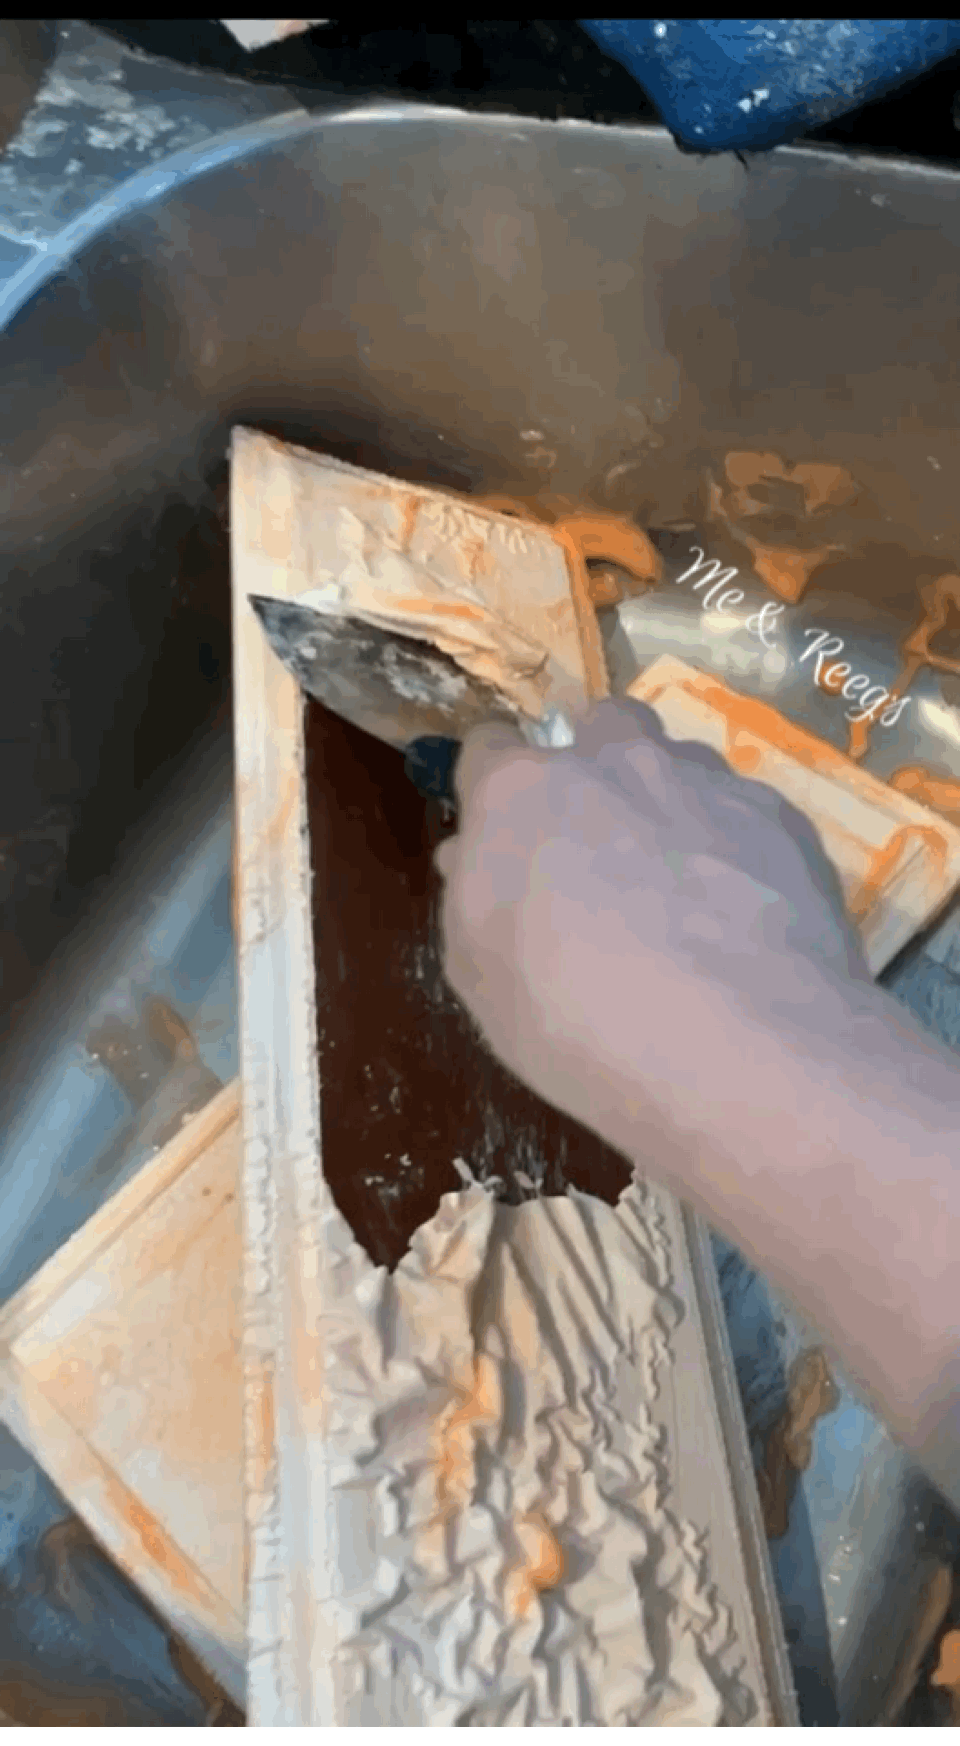  How to Strip Painted Kitchen Cabinets | Best Way to Save an Ugly Kitchen